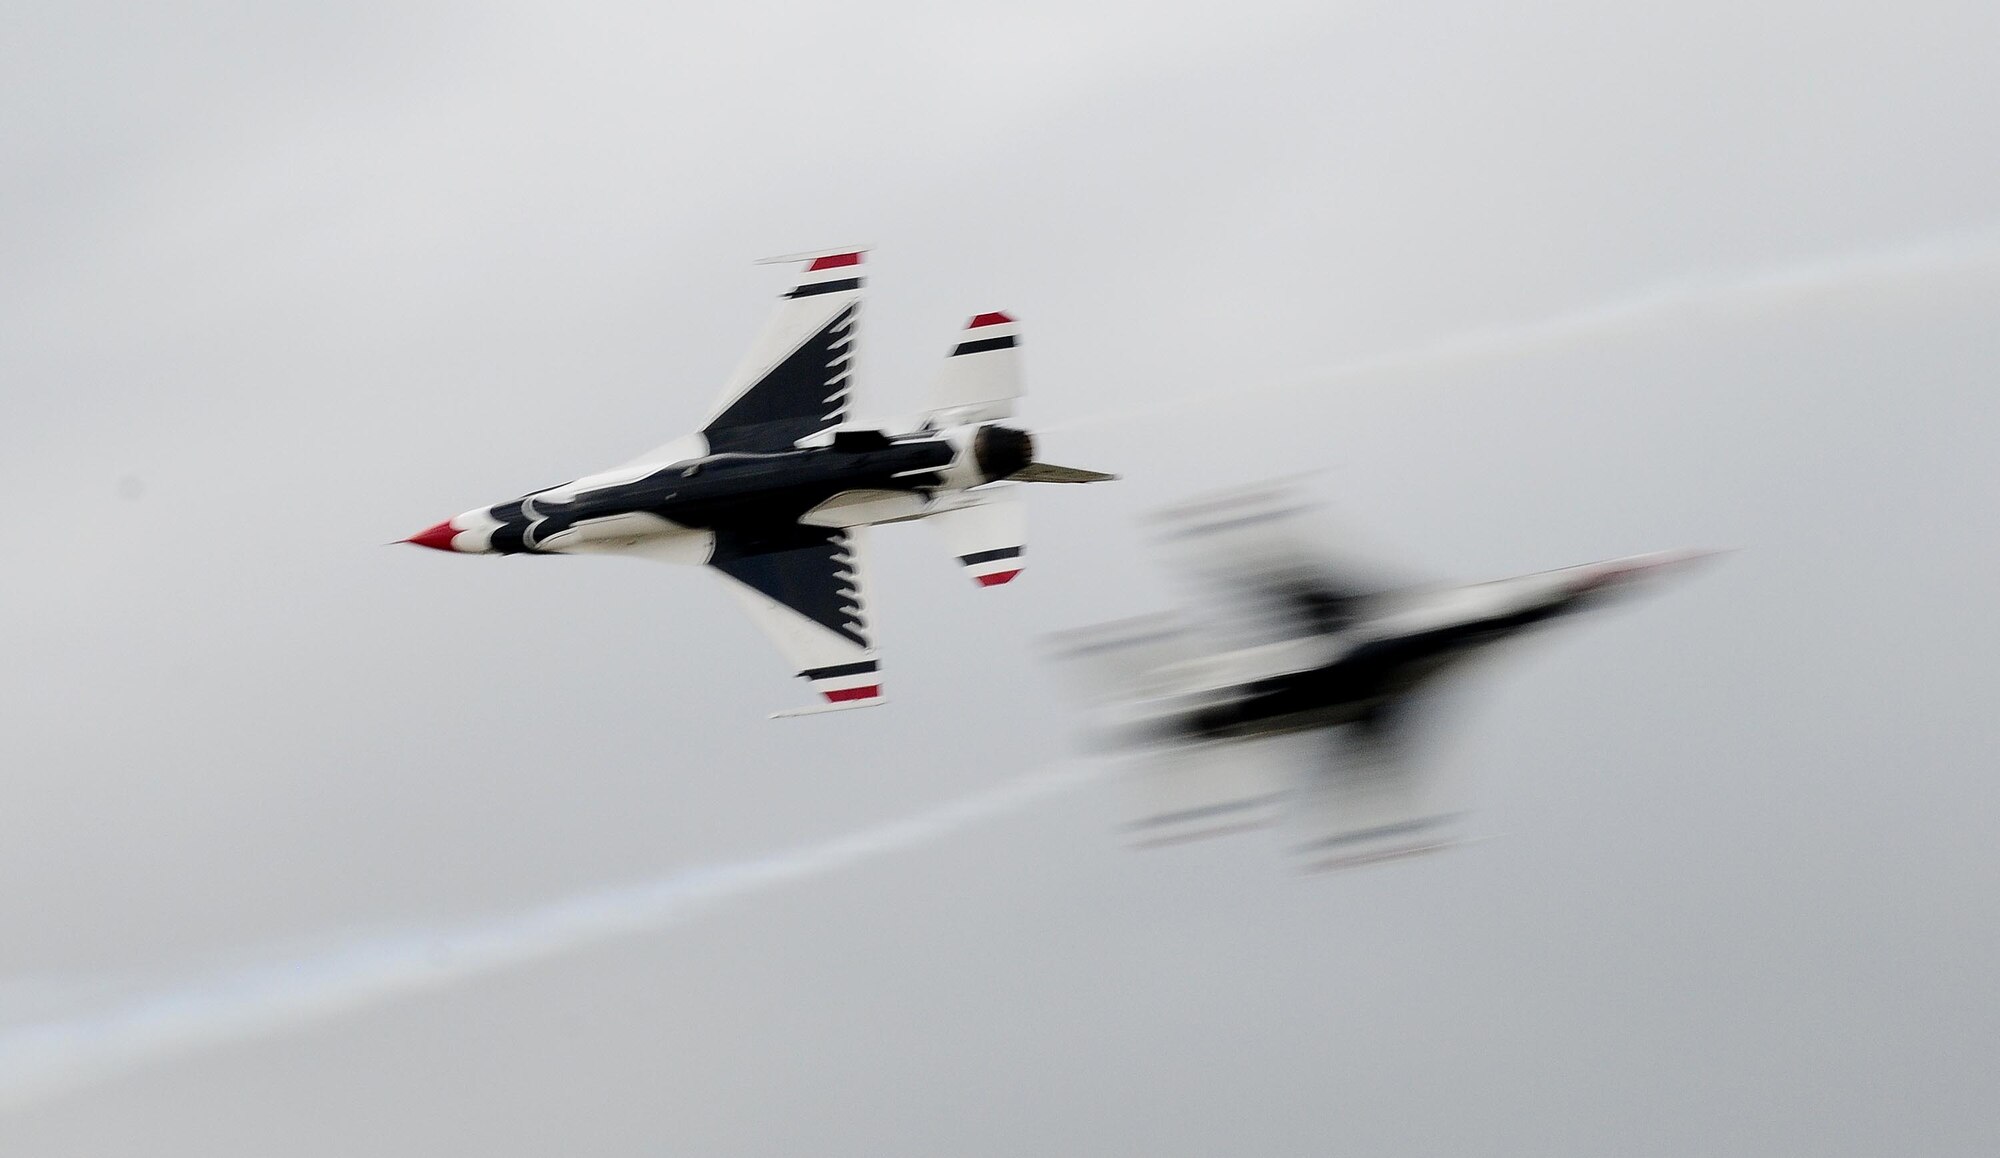 ANDERSEN AIR FORCE BASE, Guam - U.S. Air ForceThunderbird F-16s fly in trail formation here Oct. 6. The air show is a free even open to the public. Andersen's main gate will open at noon and close at 5 p.m. (U.S. Air Force photo by Senior Airman Nichelle Anderson)